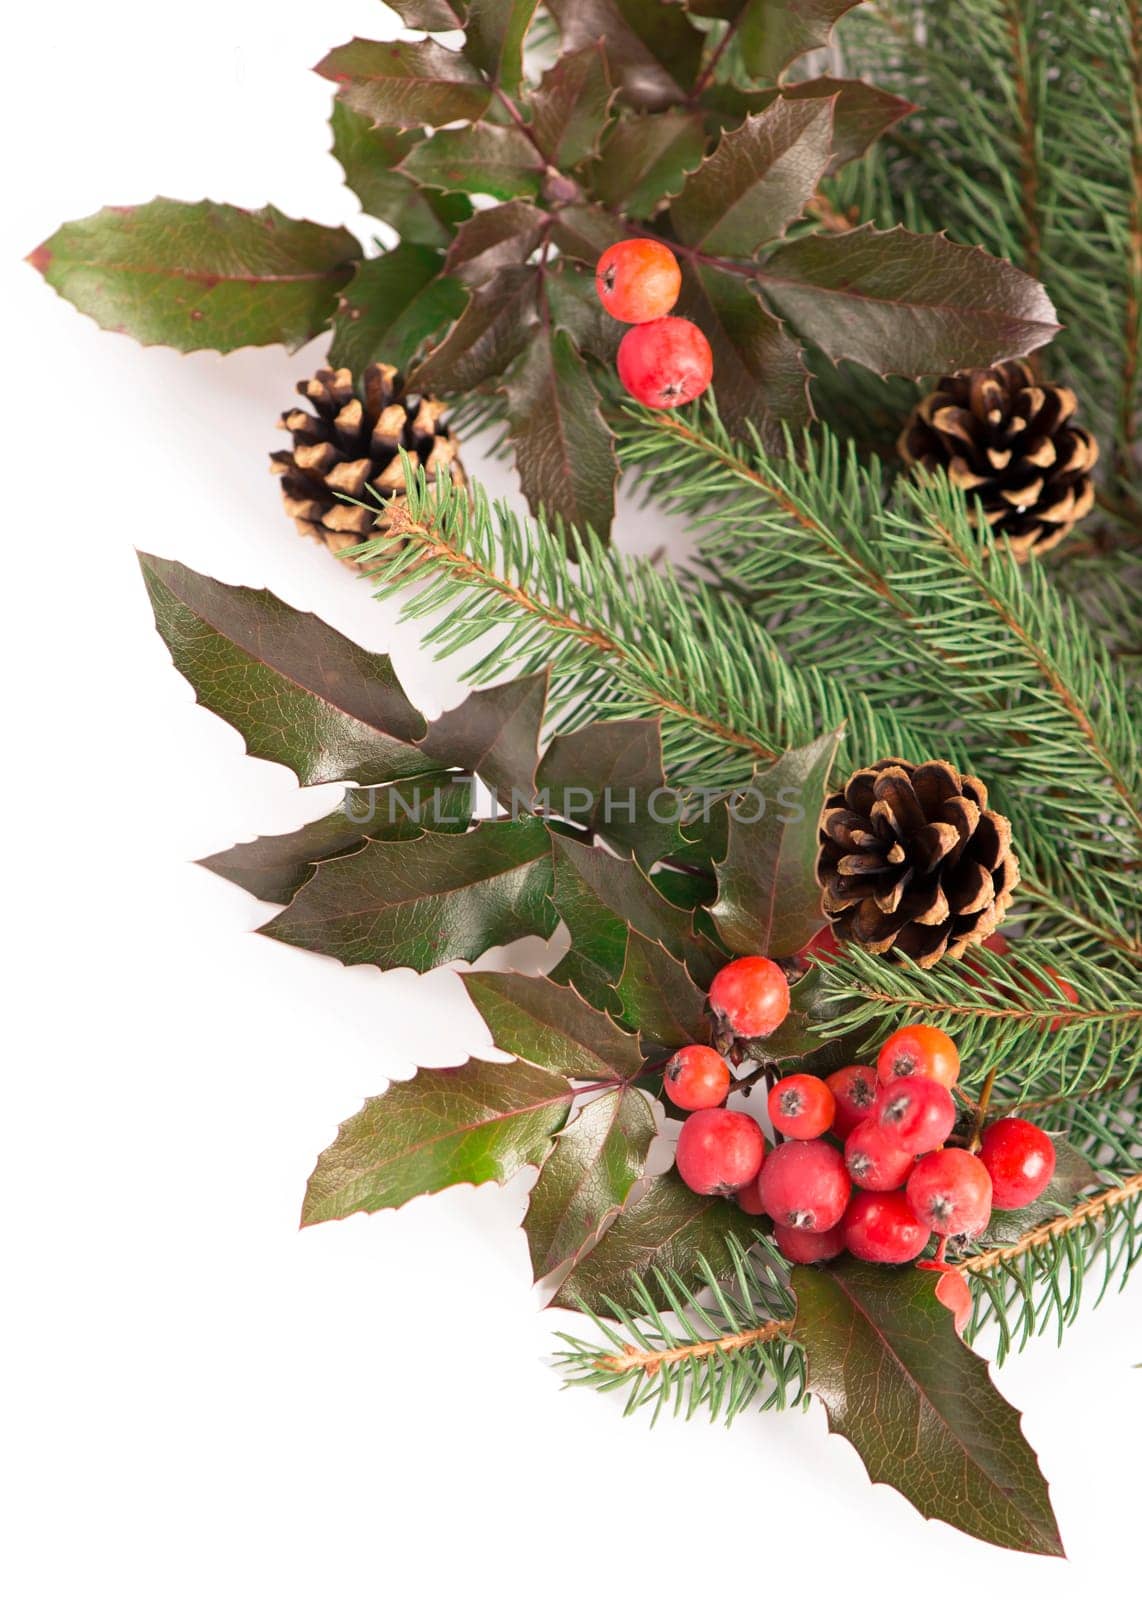 Christmas seasonal border of holly, mistletoe, sprigs with pine cones over white background